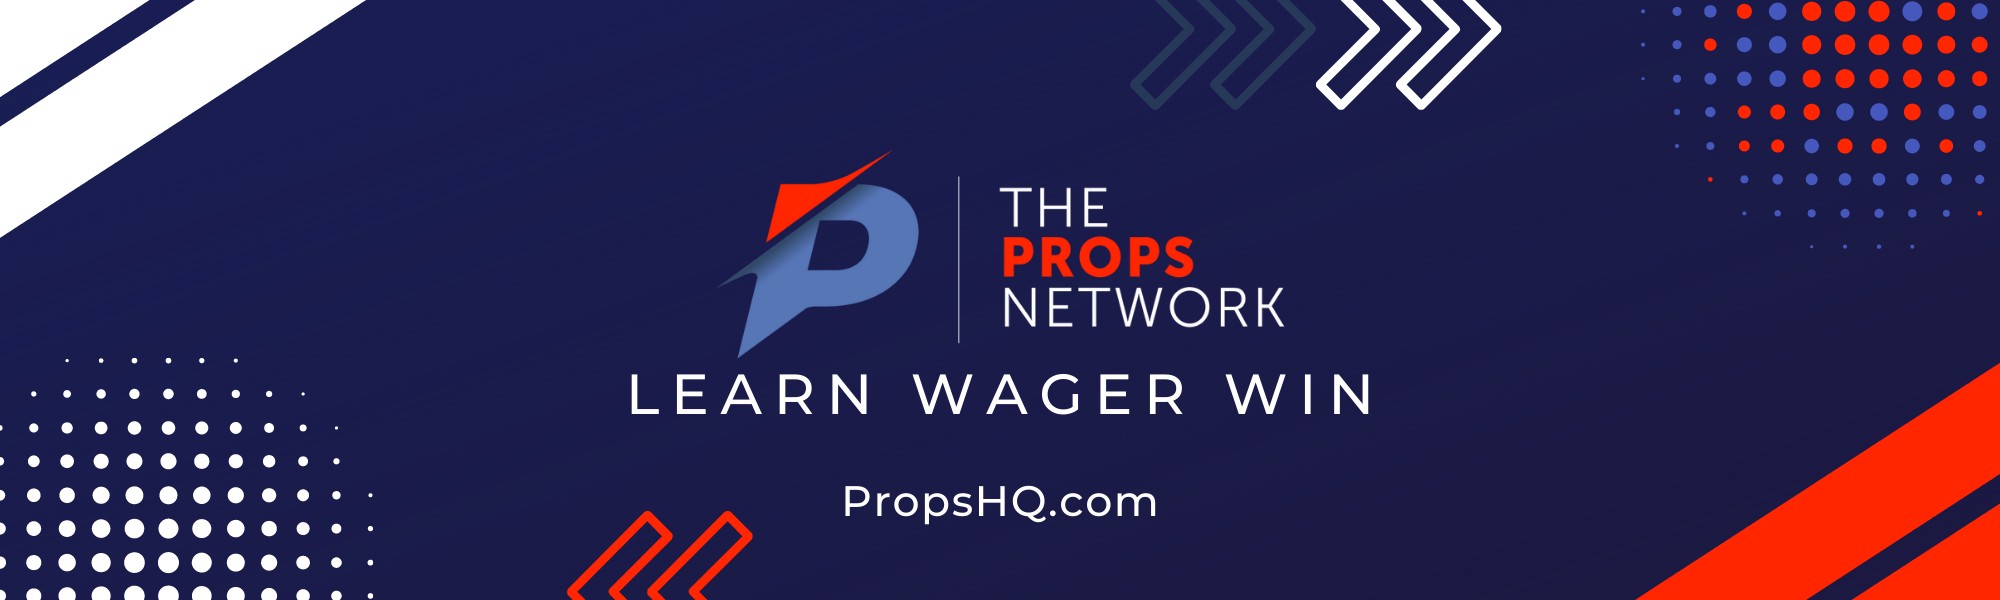 Playmaker acquires The Props Network